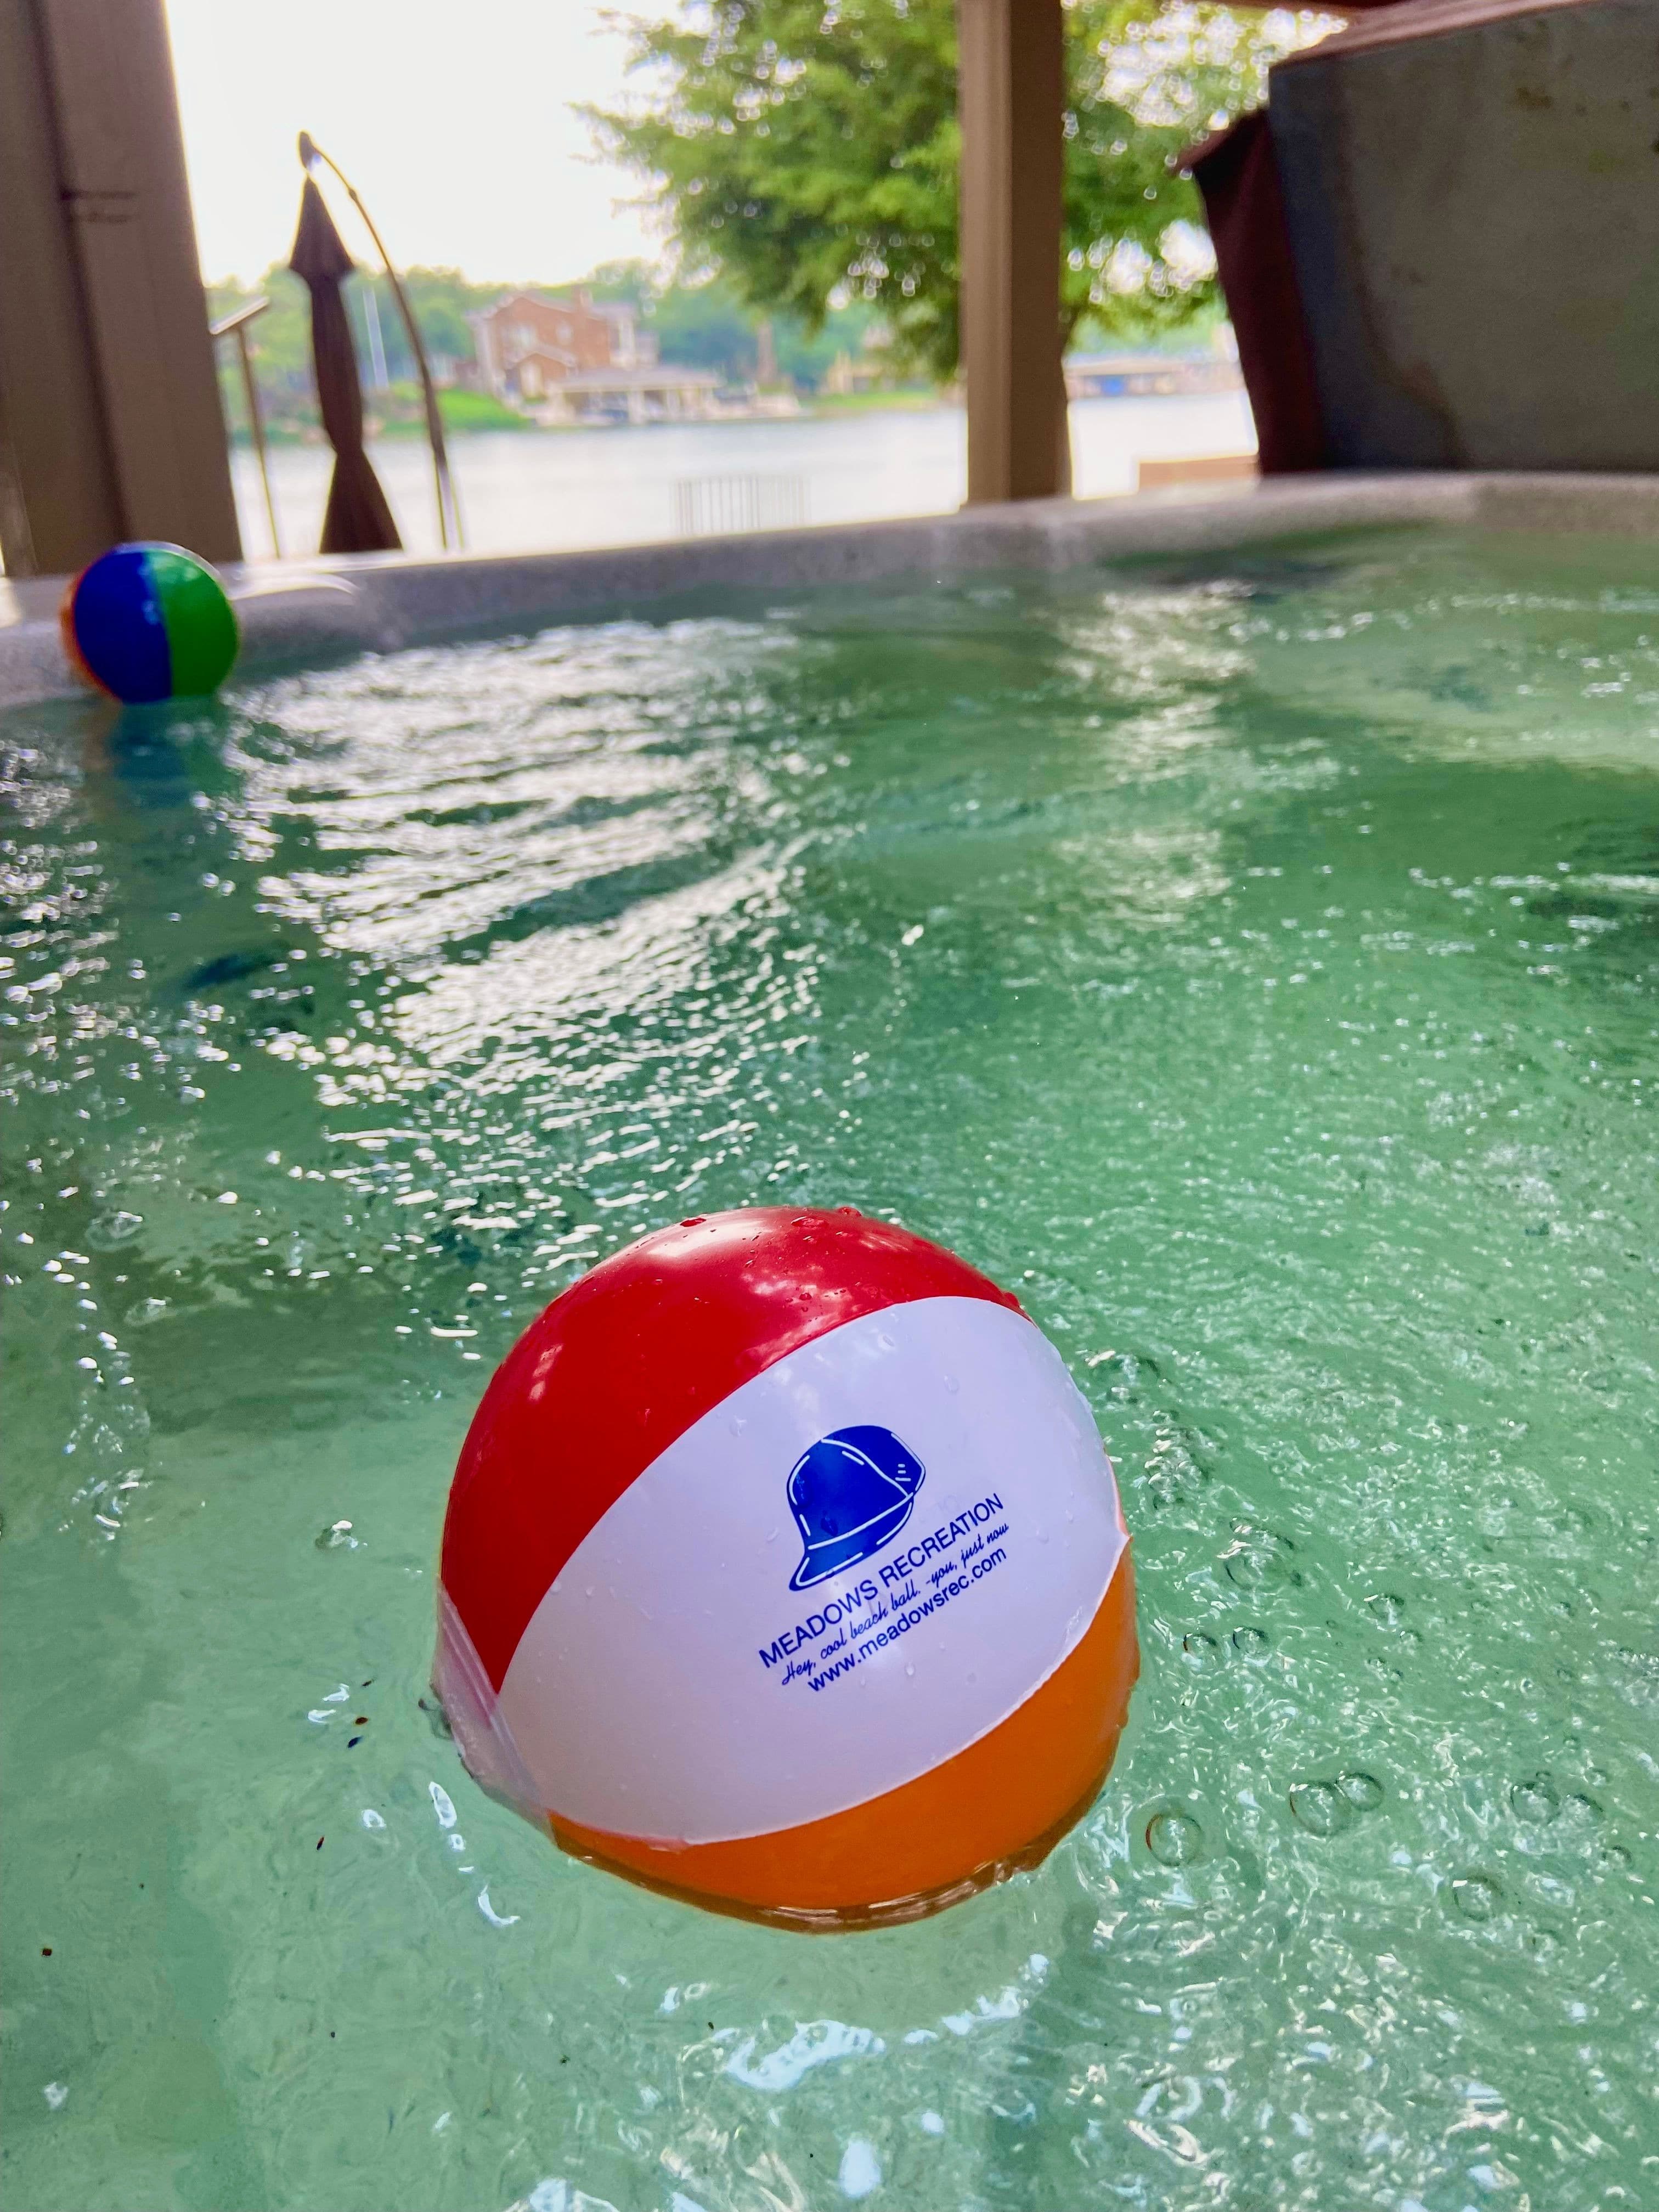 Mini Meadows Recreation beach balls in classic color scheme floating in hot tub